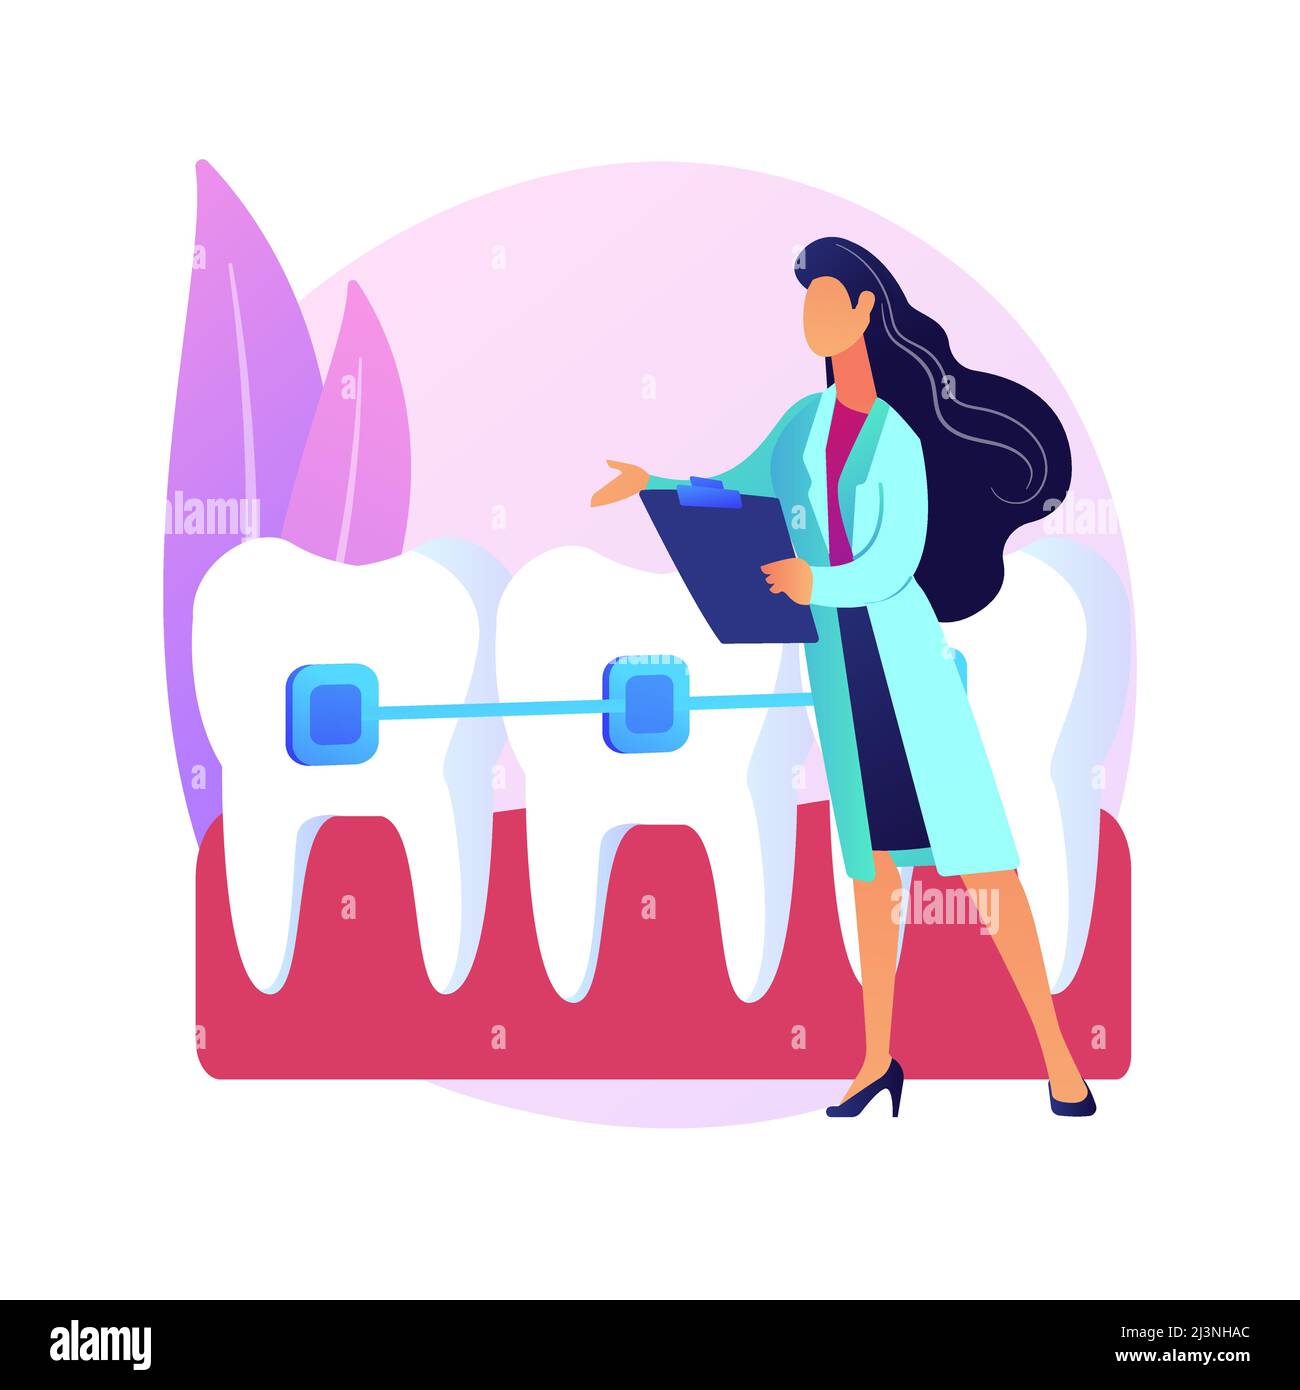 Orthodontic services abstract concept vector illustration. Orthodontic clinic department, family dentistry, dental appliance, oral hygiene, teeth cent Stock Vector